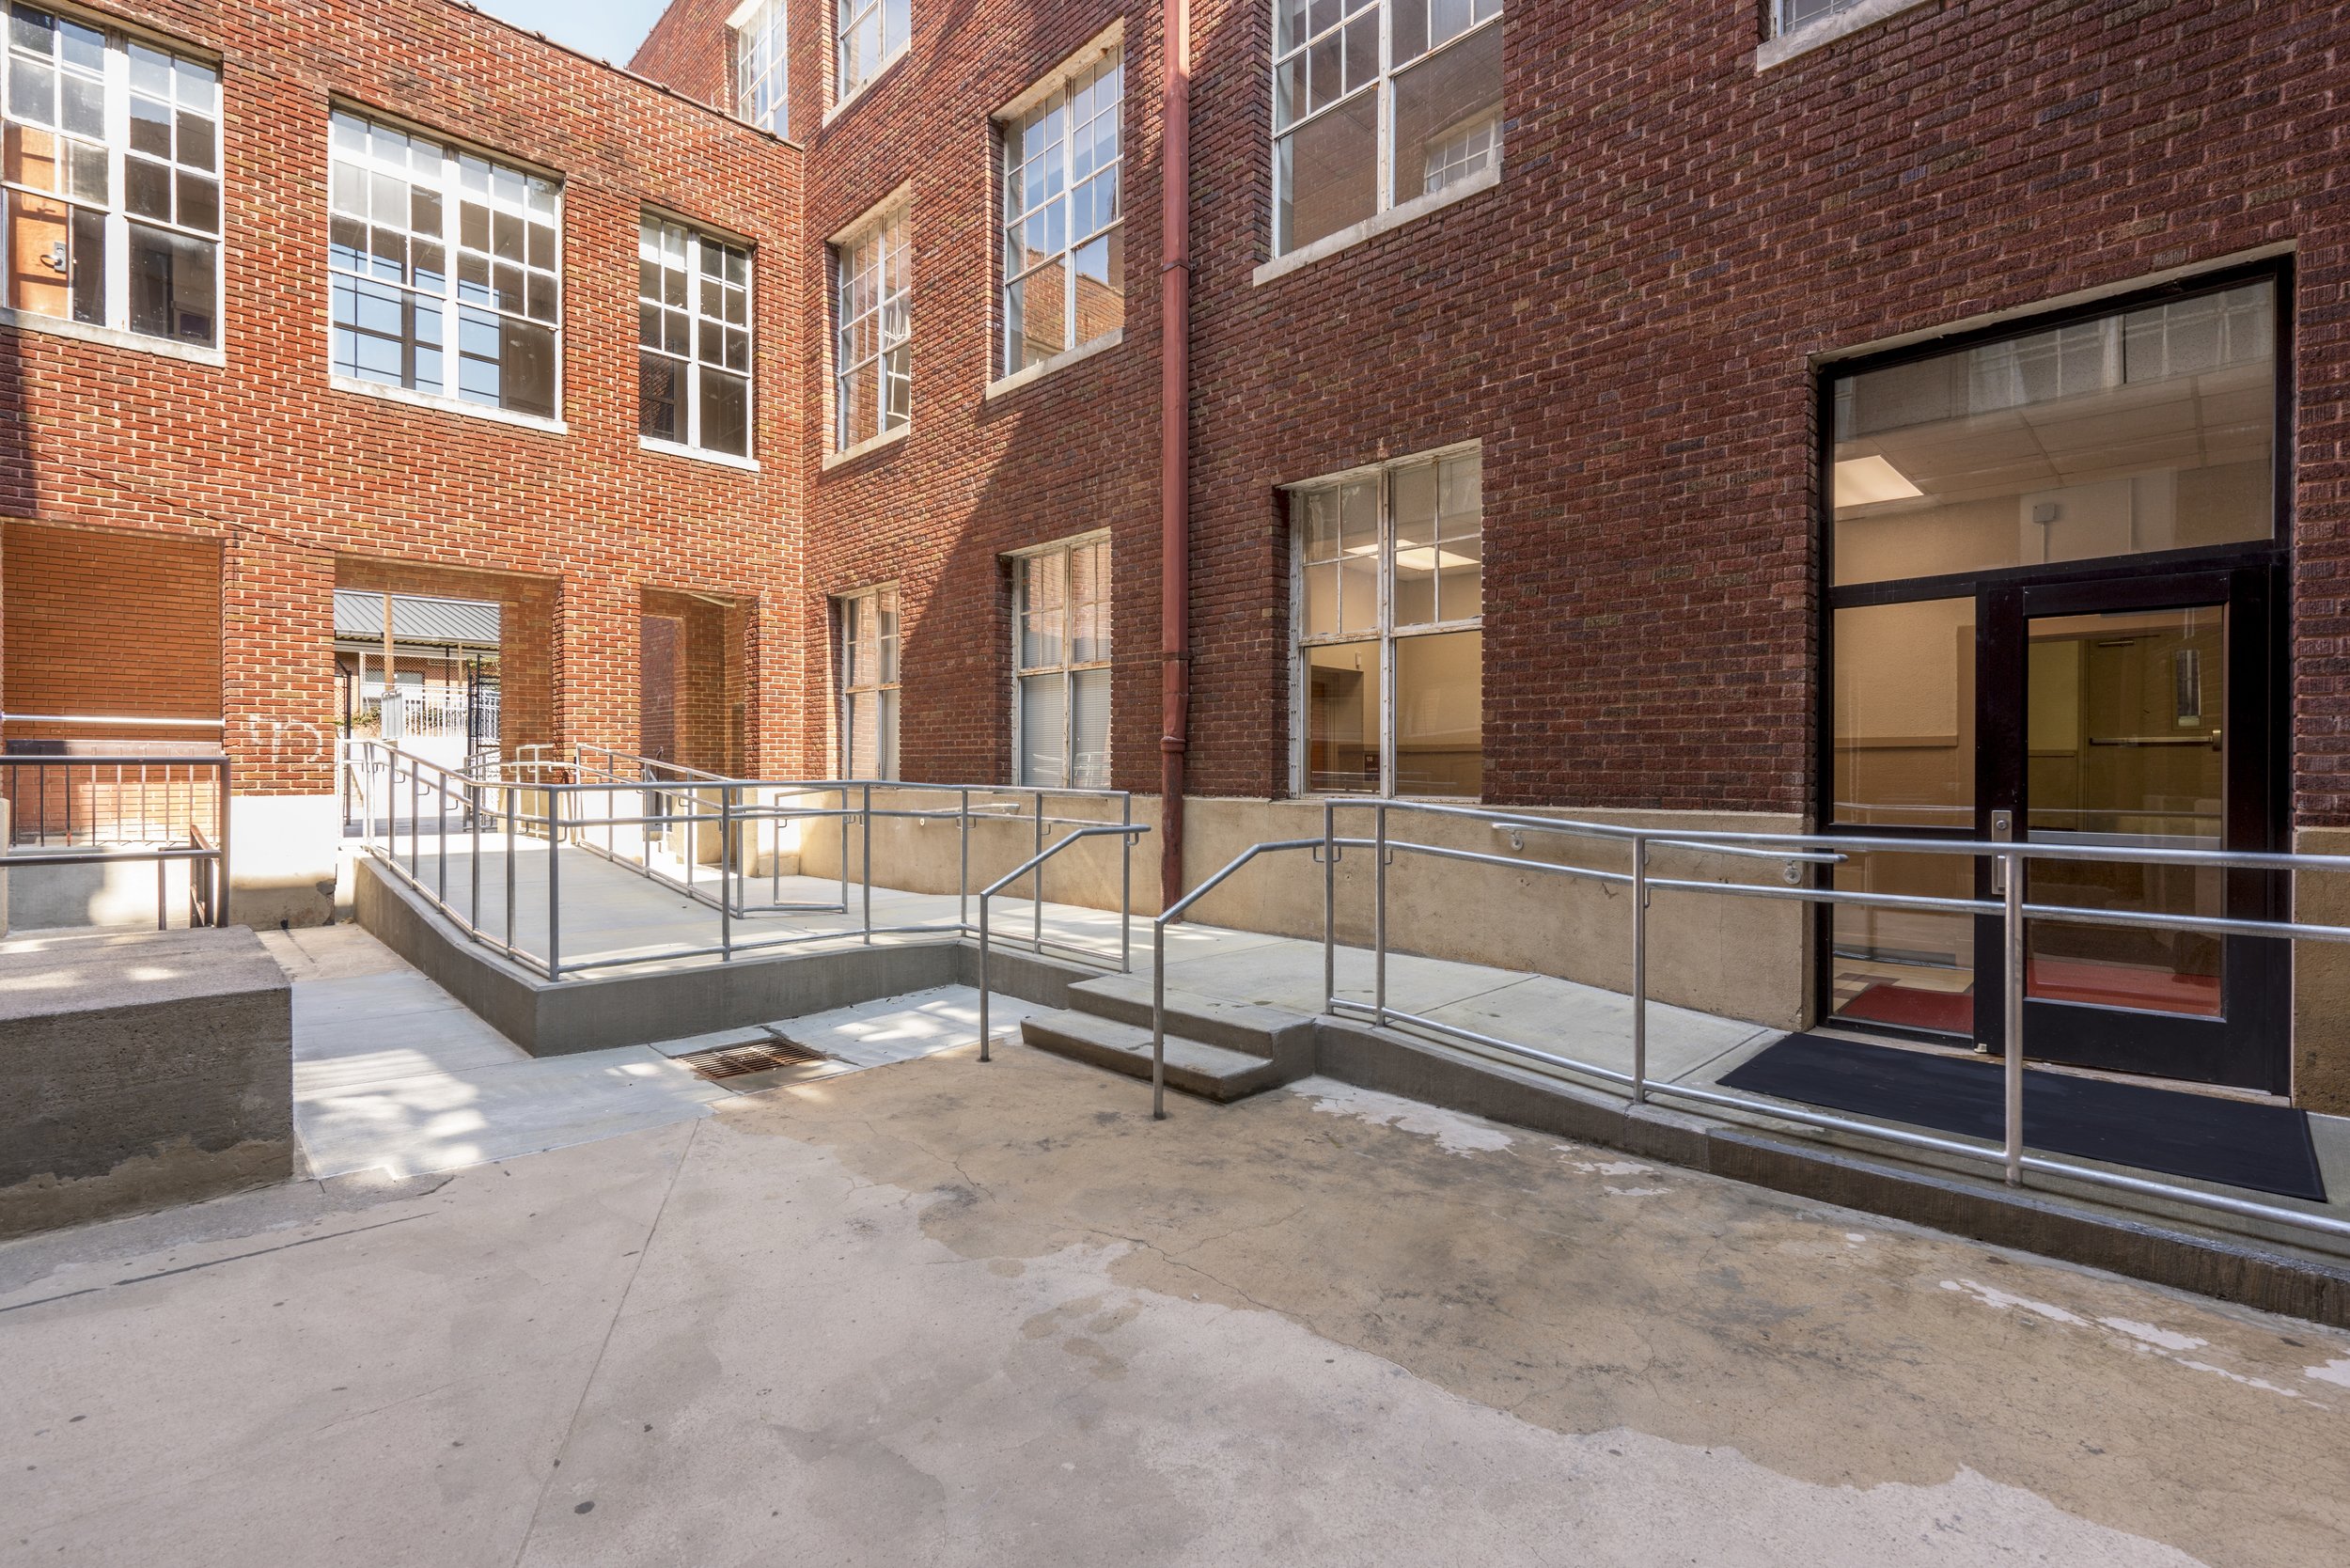  EXTERIOR HANDICAP ACCESSIBLE RAMPS added ramps in courtyard 